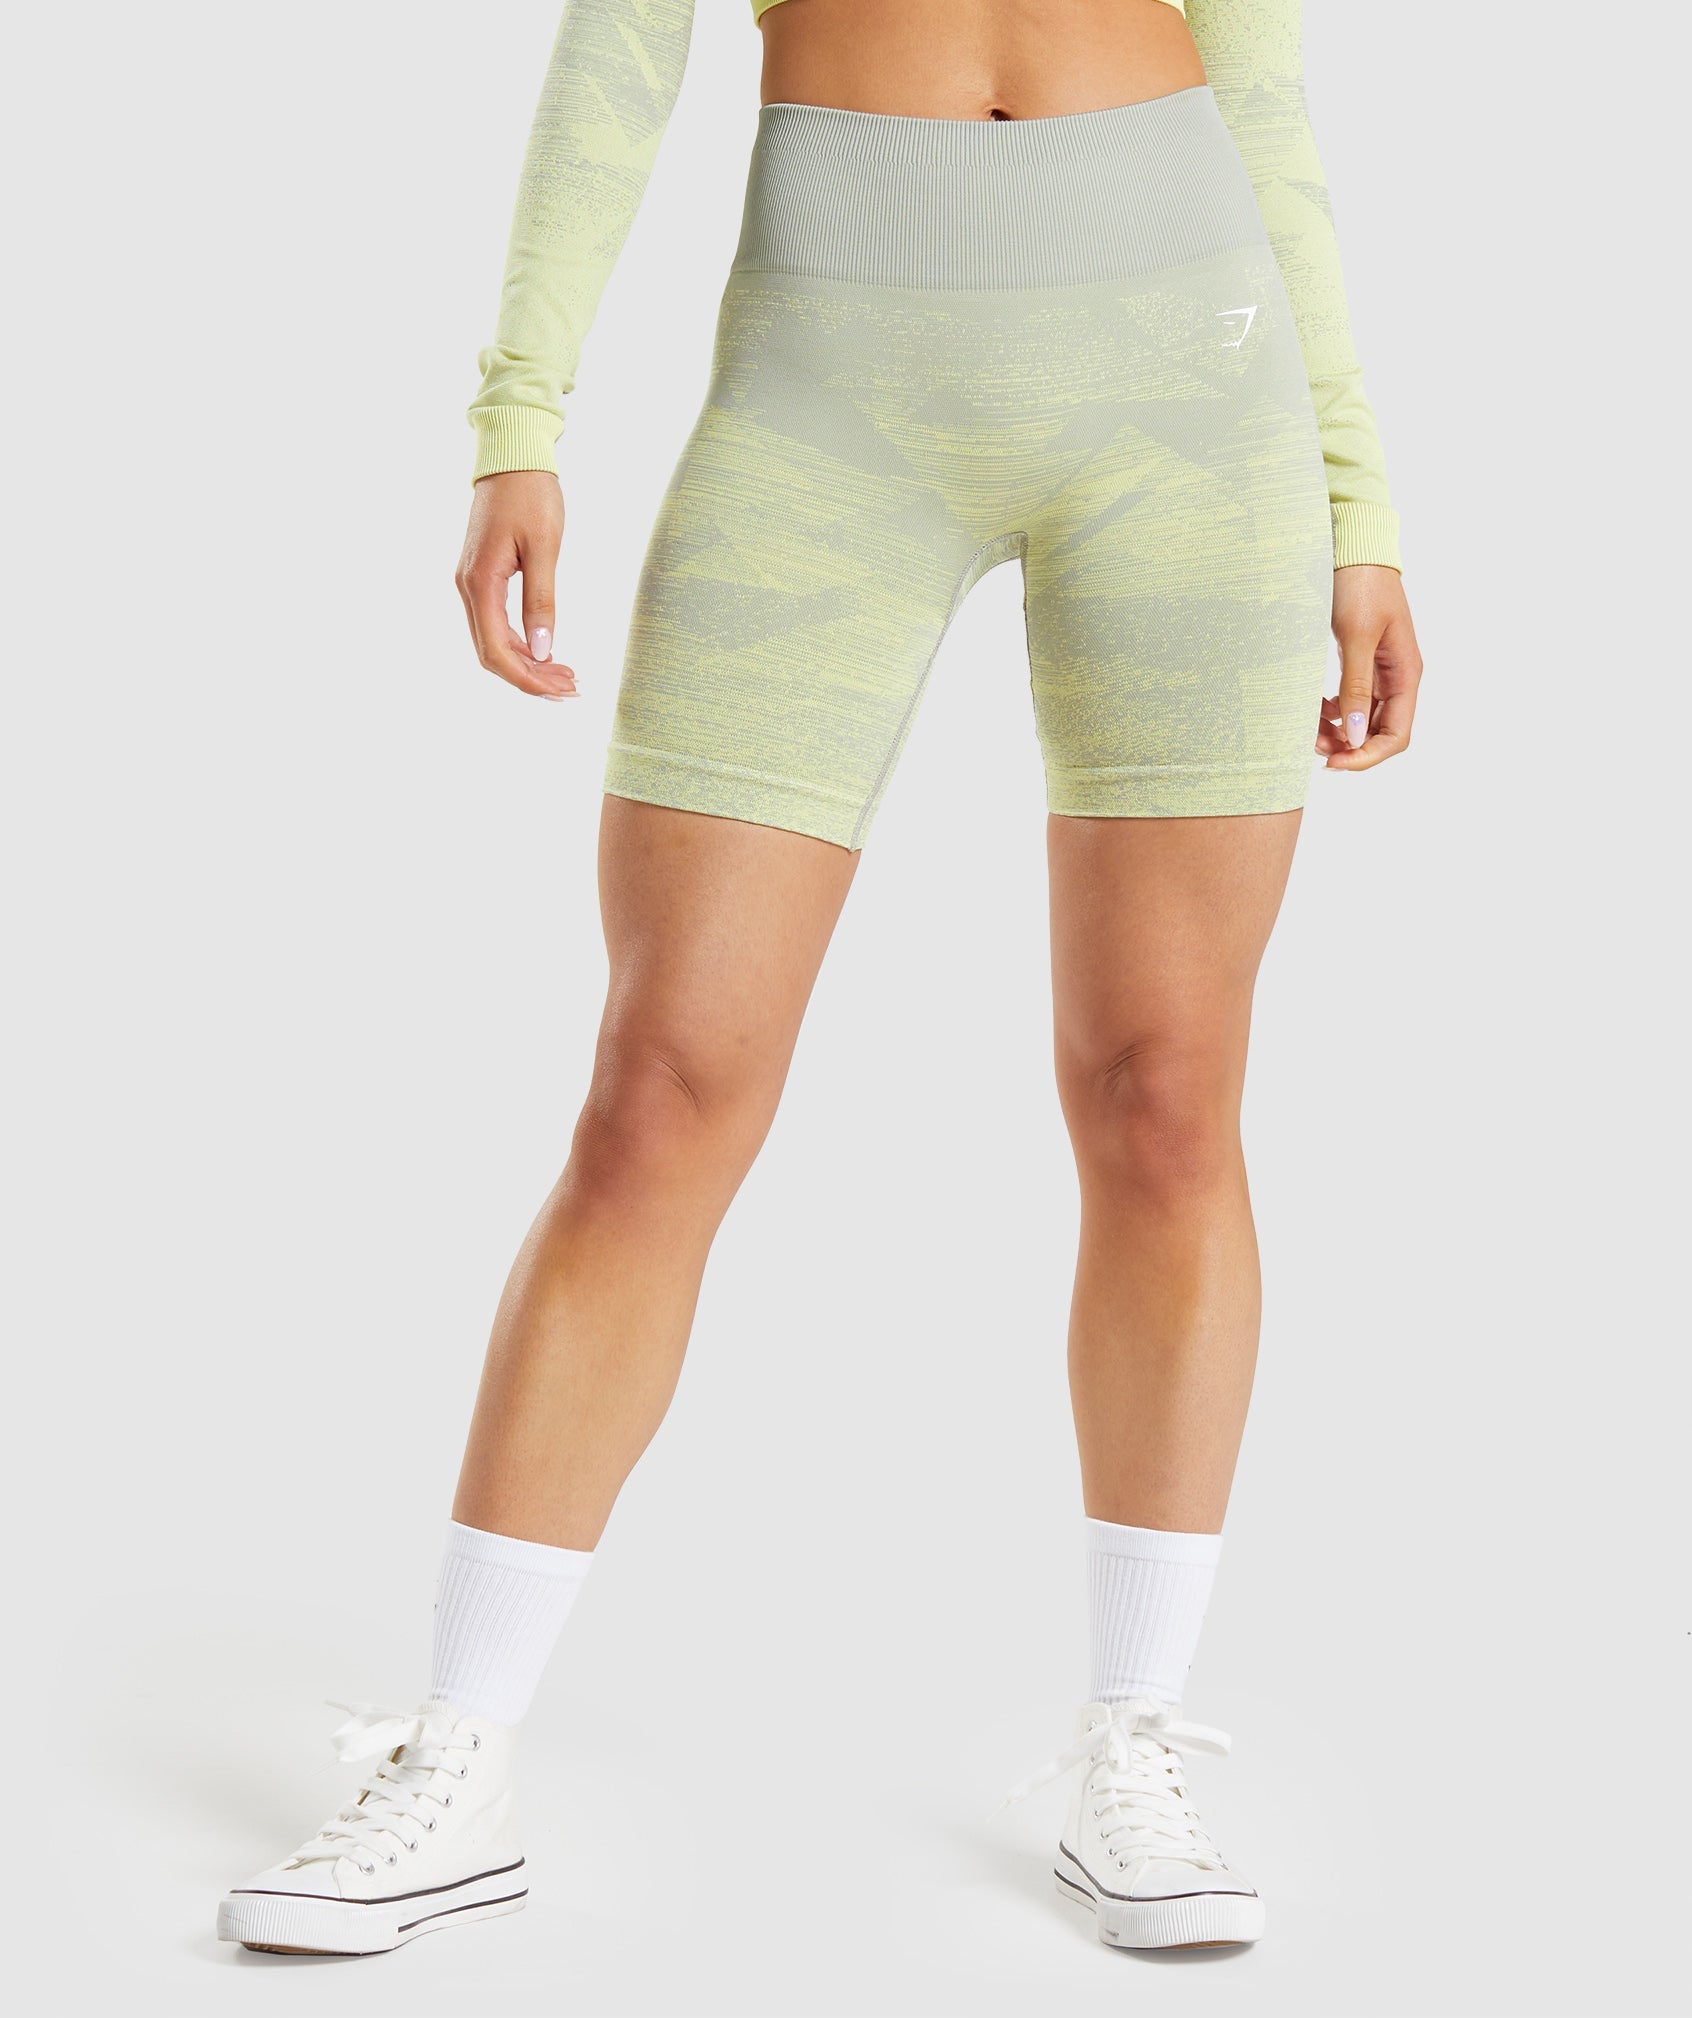 Adapt Ombre Seamless Shorts